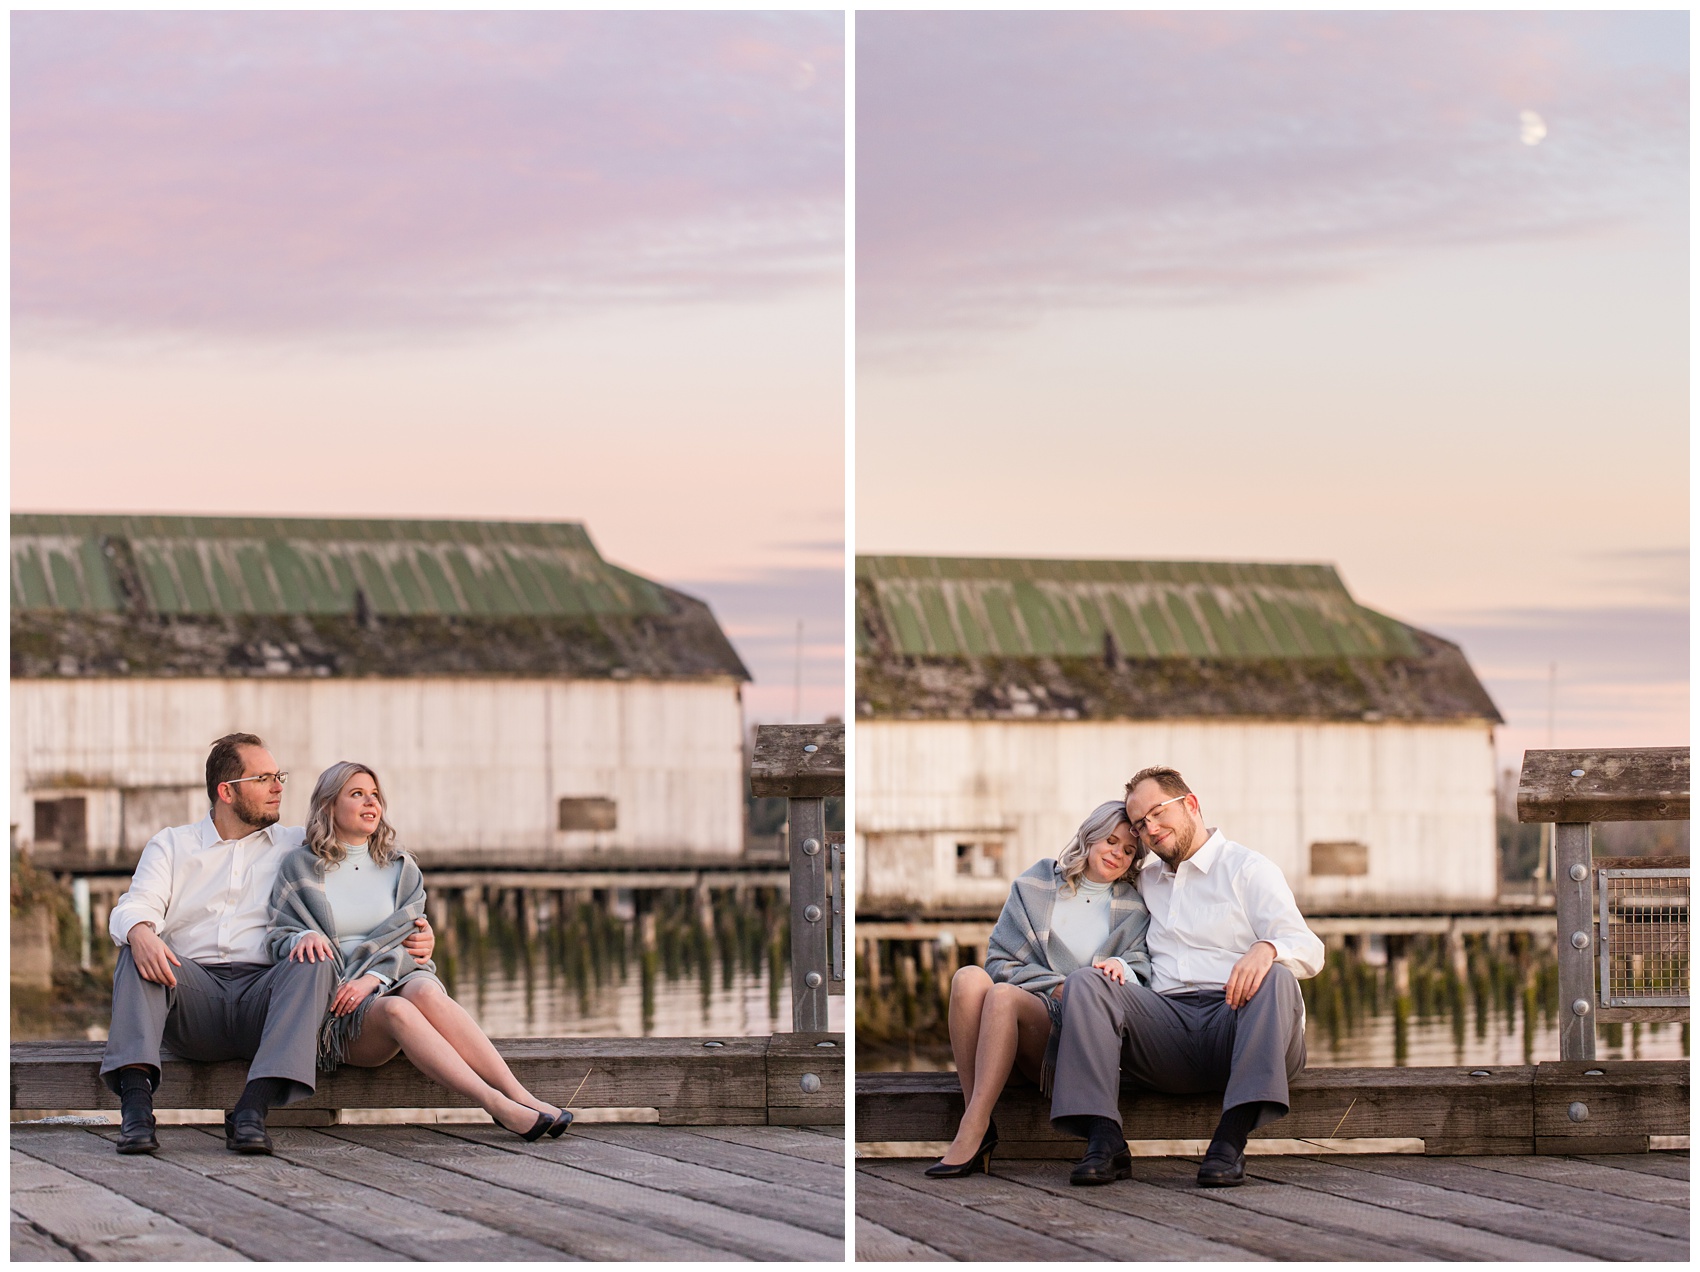 Britannia Shipyard Engagement Photos, couple sitting and admiring the moon, couple sitting and enjoying each other's company